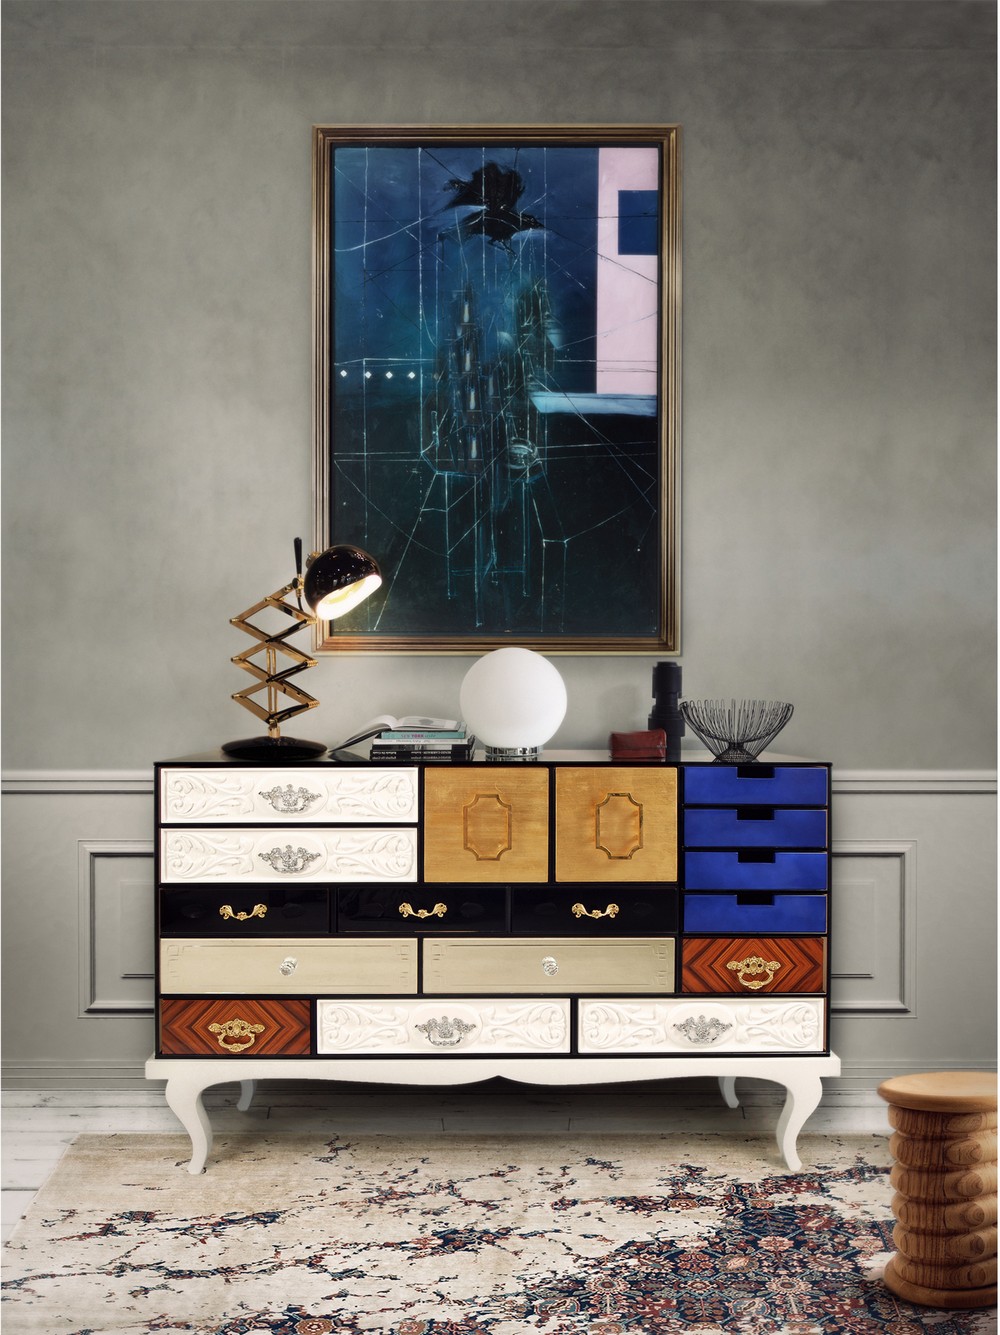 Abstract Art Geometric: The Sideboards